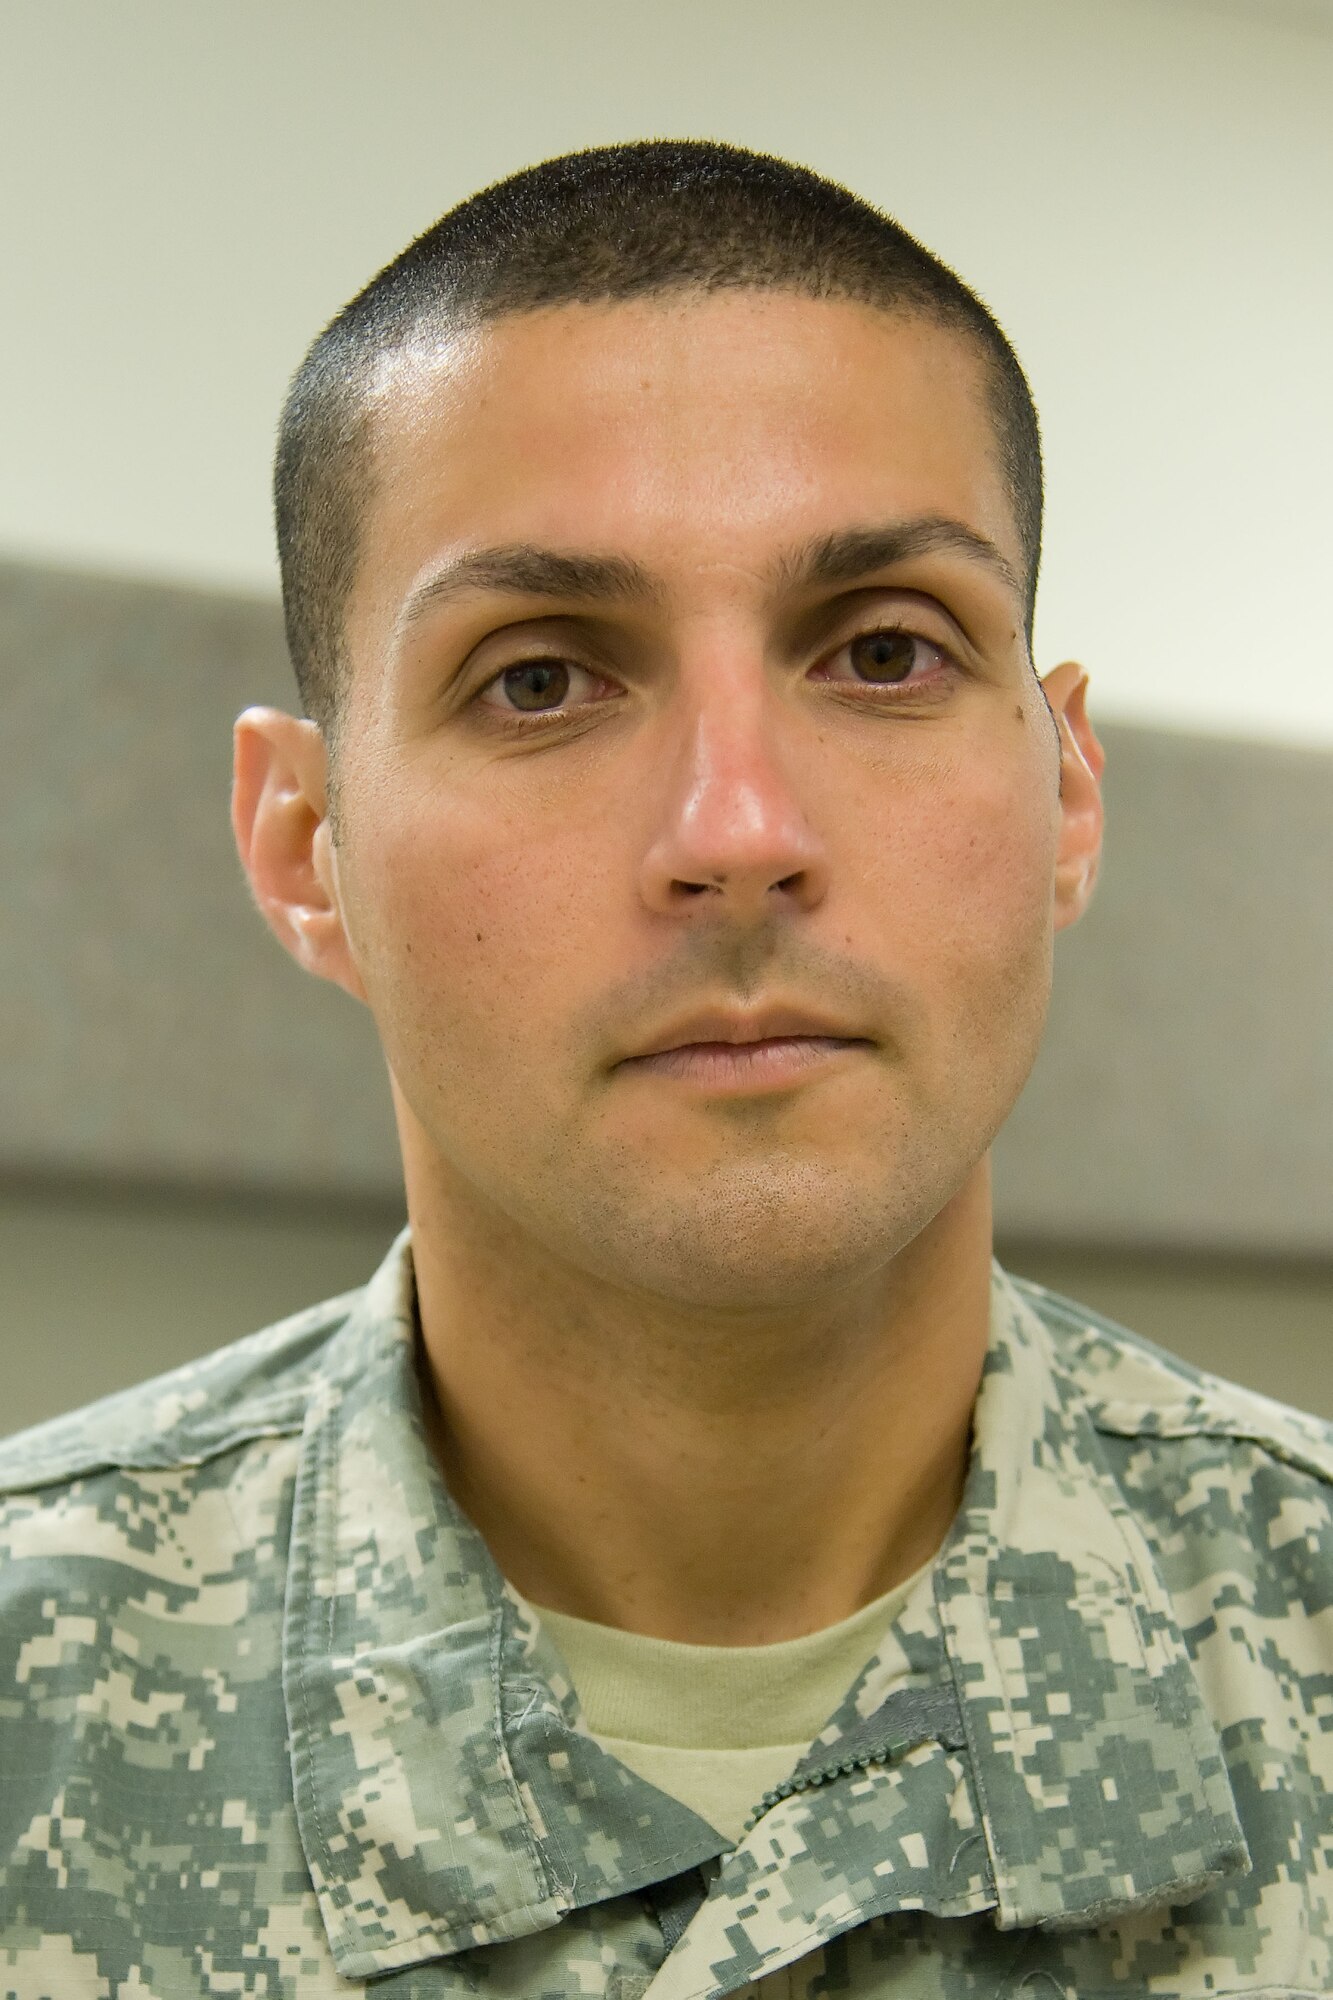 “I will be spending the 4th of July with family, having a barbecue.”

- Staff Sgt. Cesar Mendez
